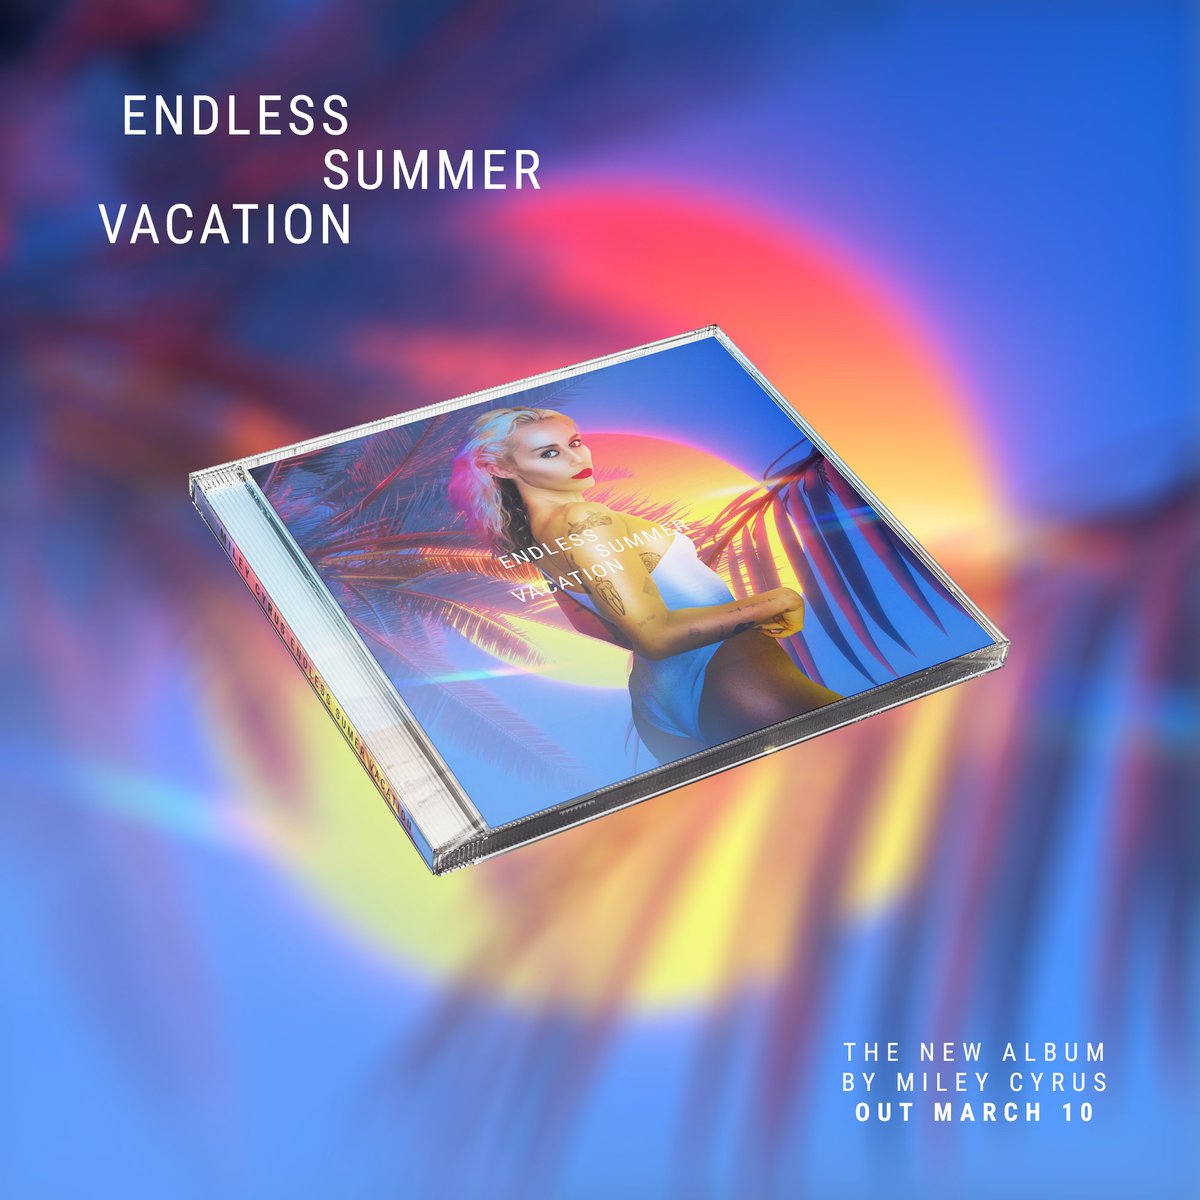 ENDLESS SUMMER VACATION
The New Album by Miley Cyrus
OUT MARCH 10 @MileyCyrus @MileyArmy 
☀️💐🌴💔

#miley #cyrus #mileycyrus #flowers #icanbuymyselfflowers #mileycyrusendlesssummervacation #endlesssummervacation #mileycyrusflowers #flowersoutnow #smilers #smilersforever